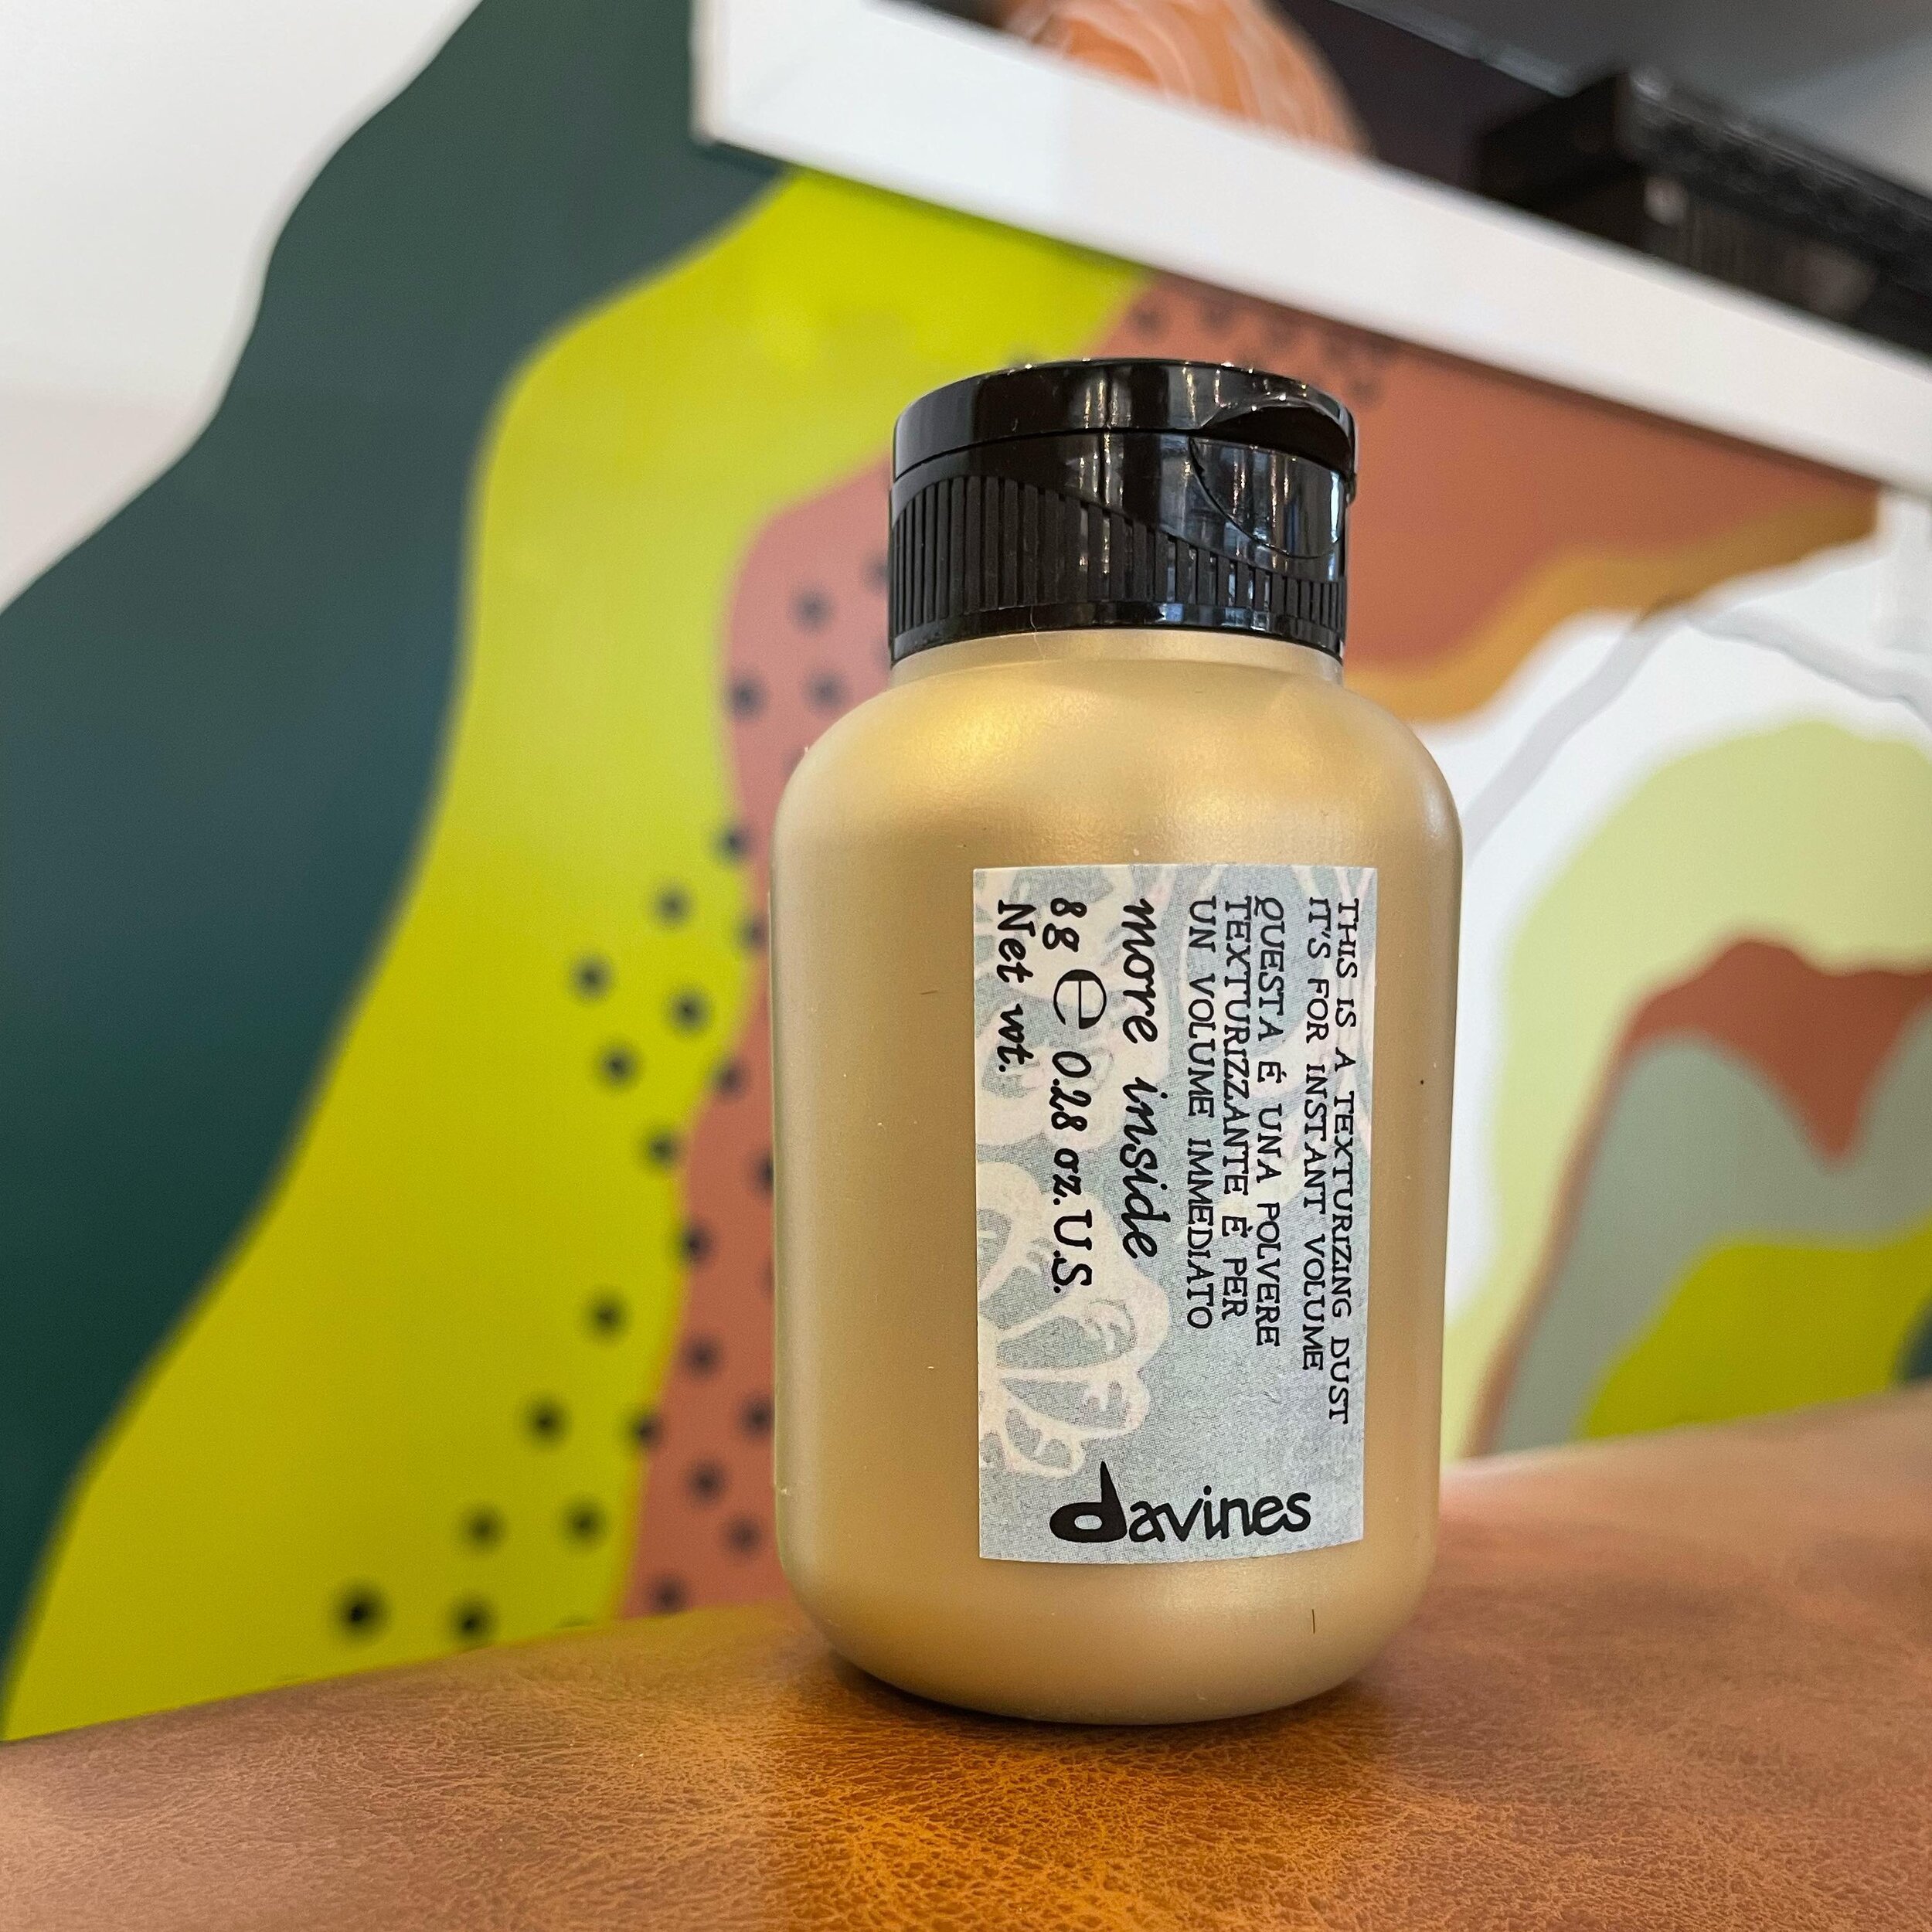 A sprinkle here, a sprinkle there. Texture dust gives the perfect lived-in look while adding weightless volume and hold. 

#nkyhair #nkysalon #cincinnatihair #cincinnatisalon #vegansalon #veganhaircare #davines #davinessalon